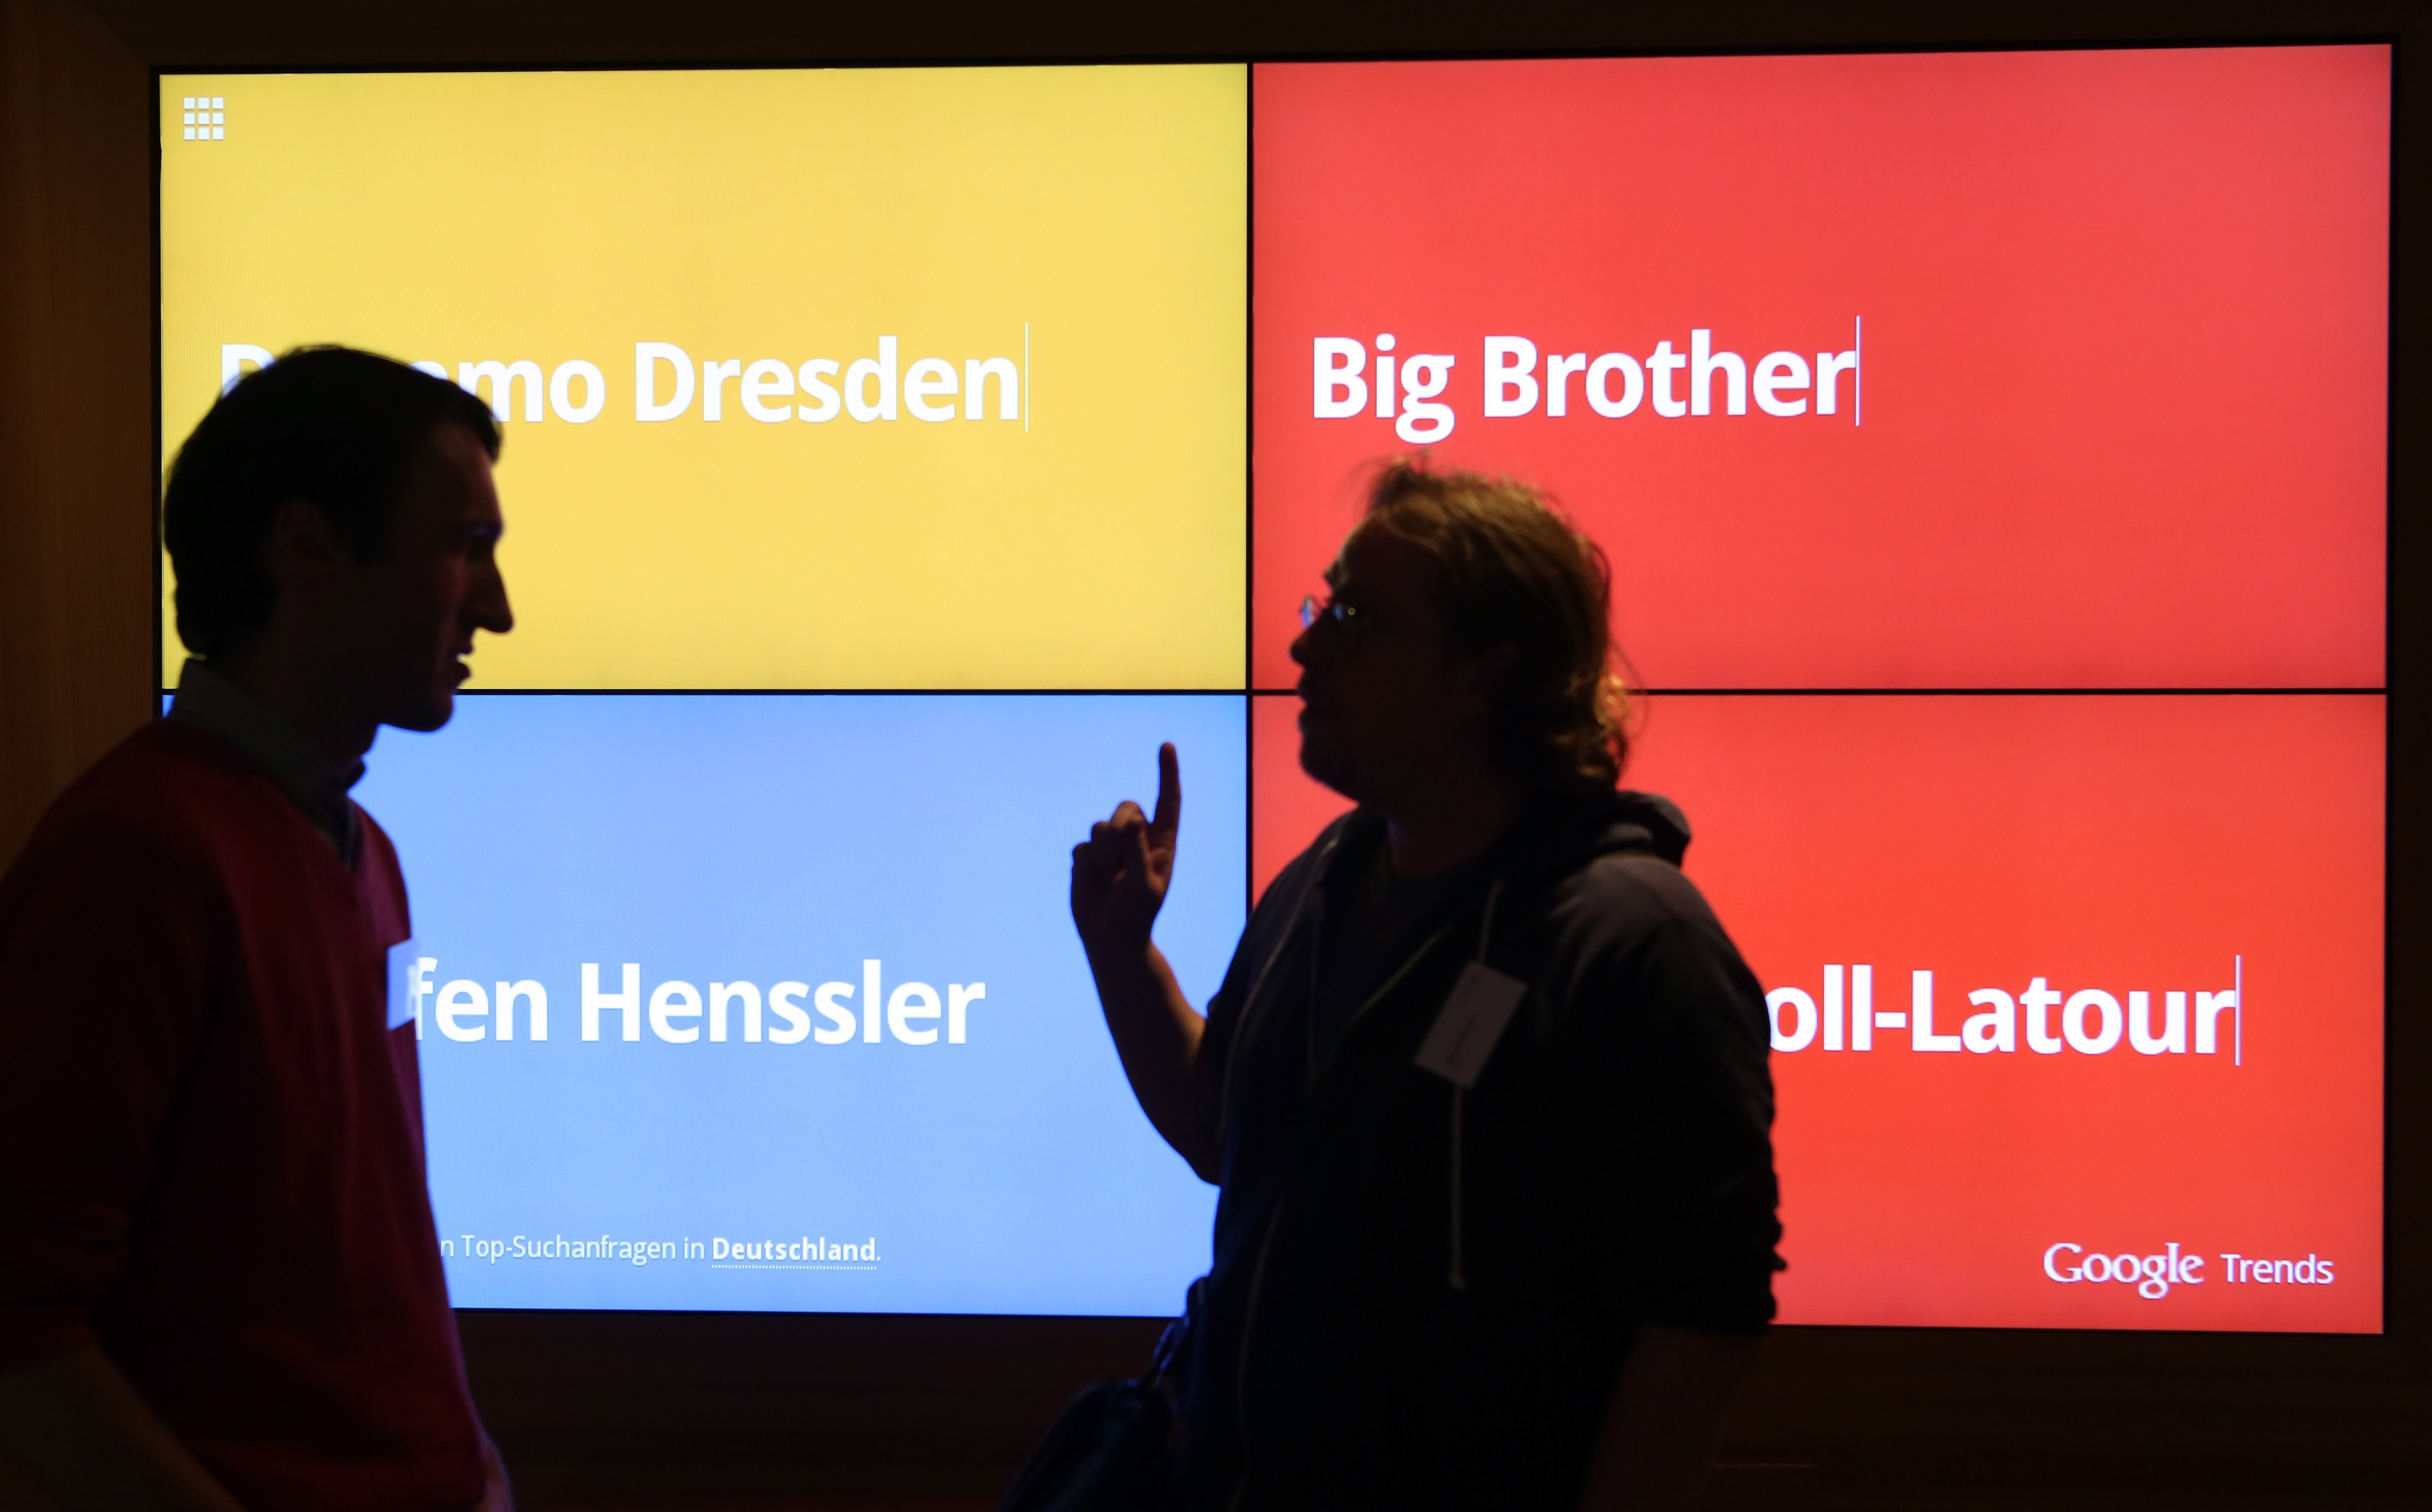 Visitors stand in front of a screen showing the most popular Google searches in Germany at that moment in the company's offices on Aug. 21, 2014 in Berlin.